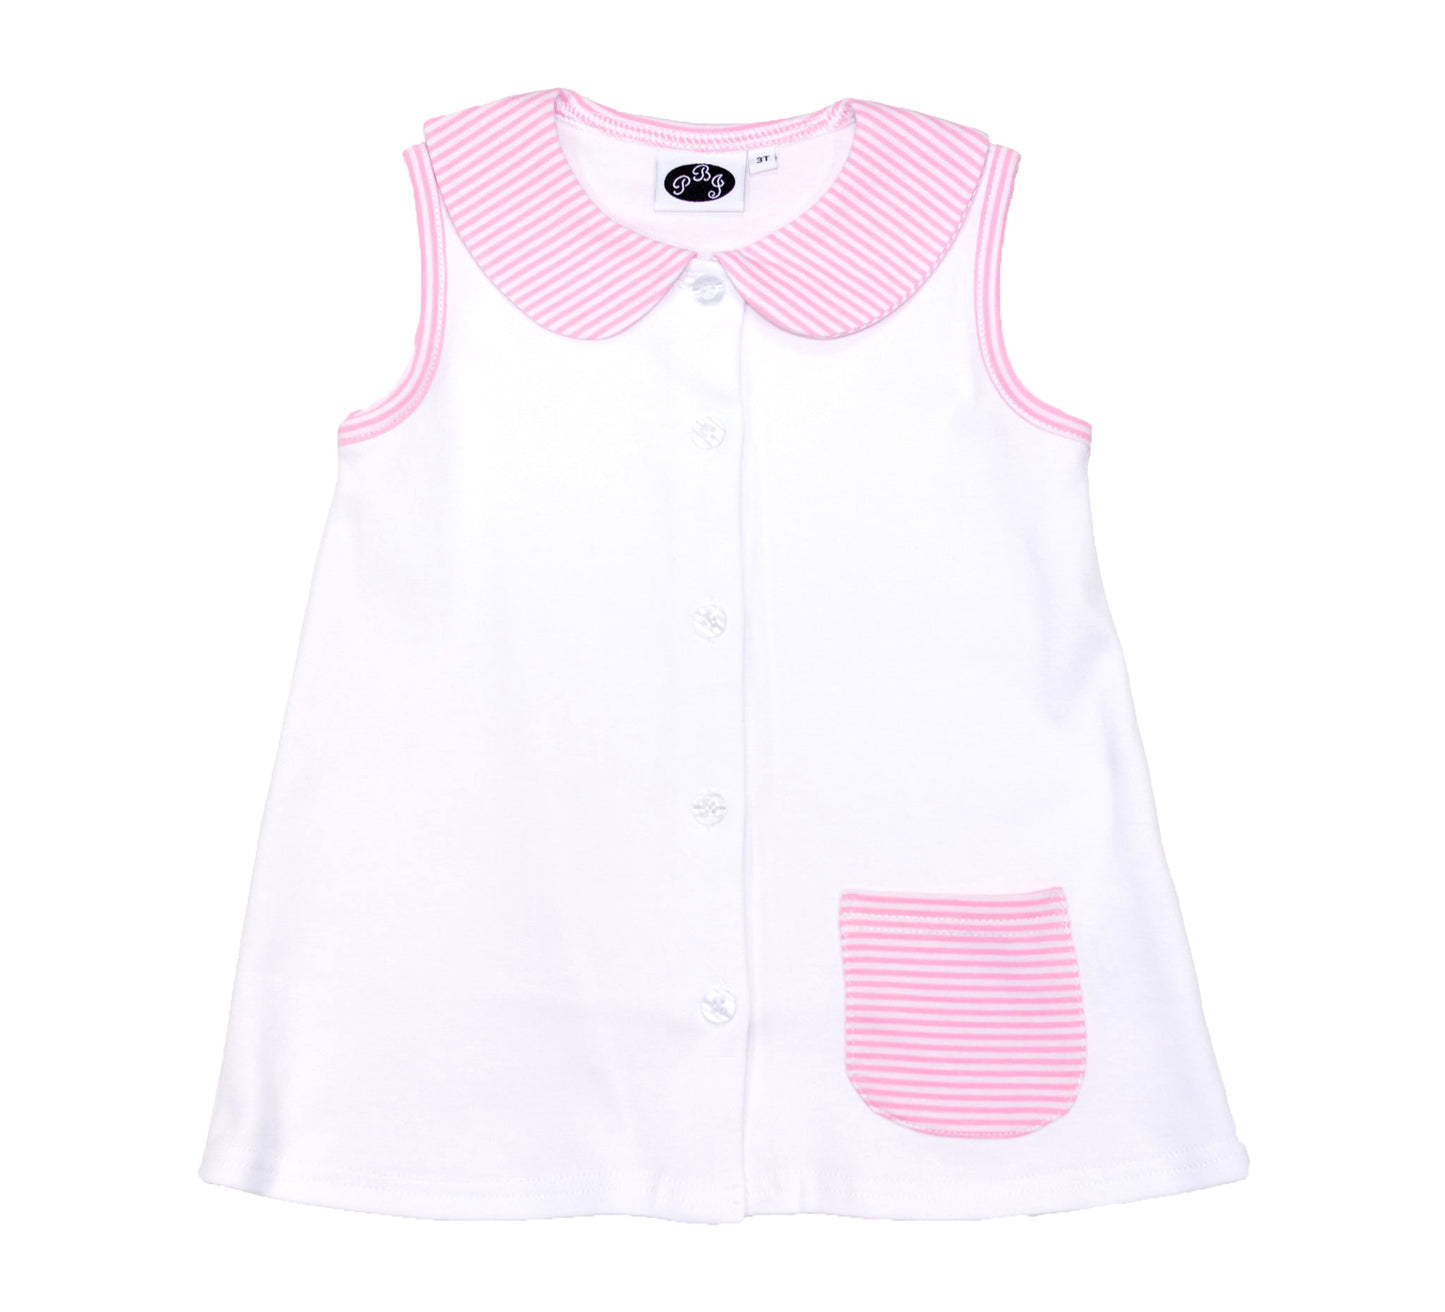 Alex top solid white with pink stripes